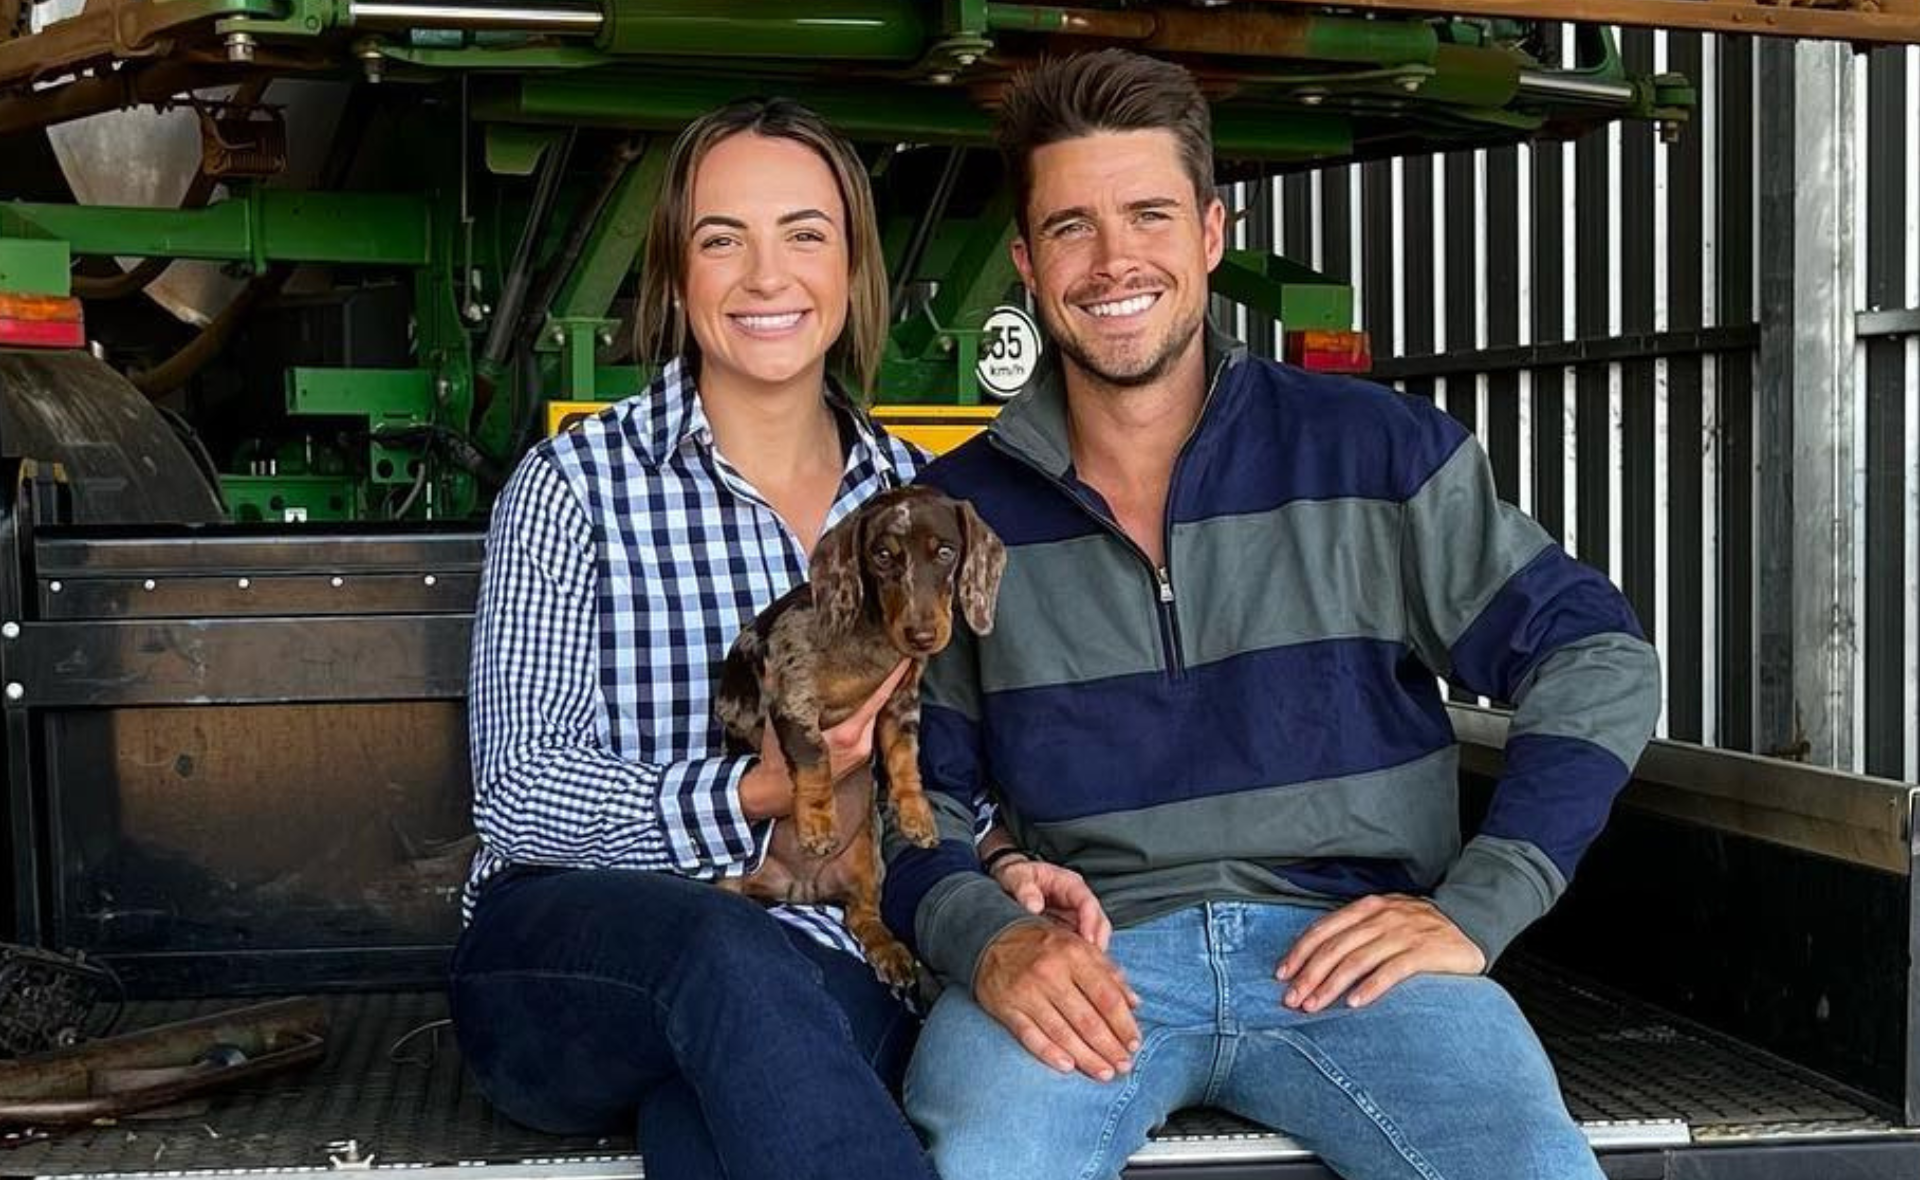 Farmer Wants A Wife’s Jess and Will talk keeping fit, fur baby Clyde and family plans